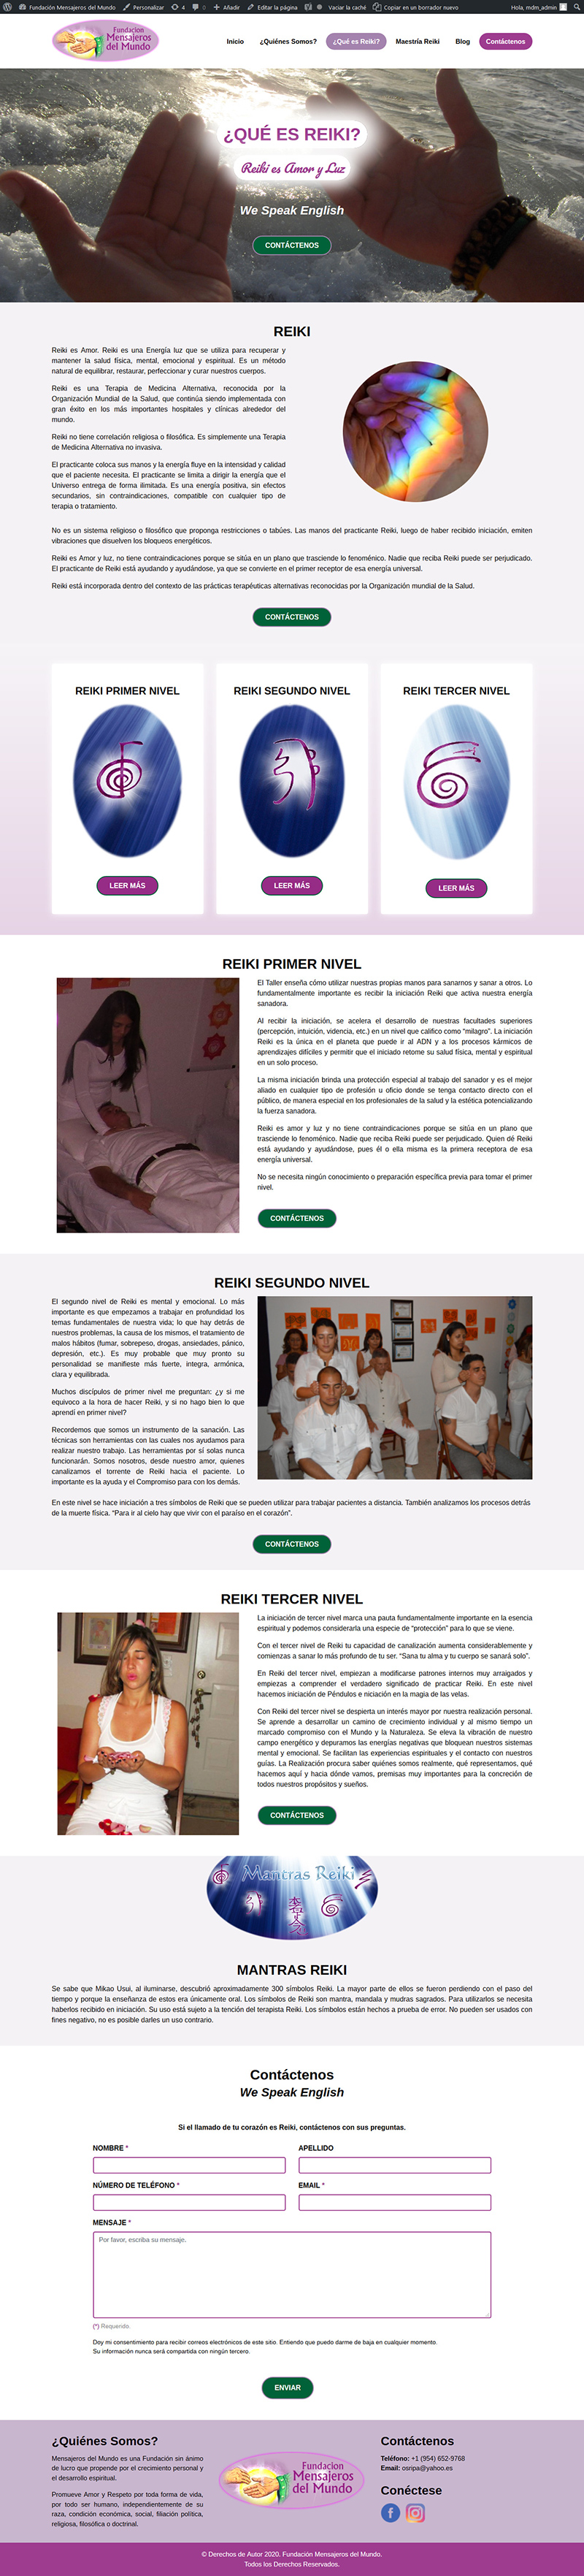 Website "Mensajeros del Mundo": Page "What is Reiki?" viewed on large-screen devices.